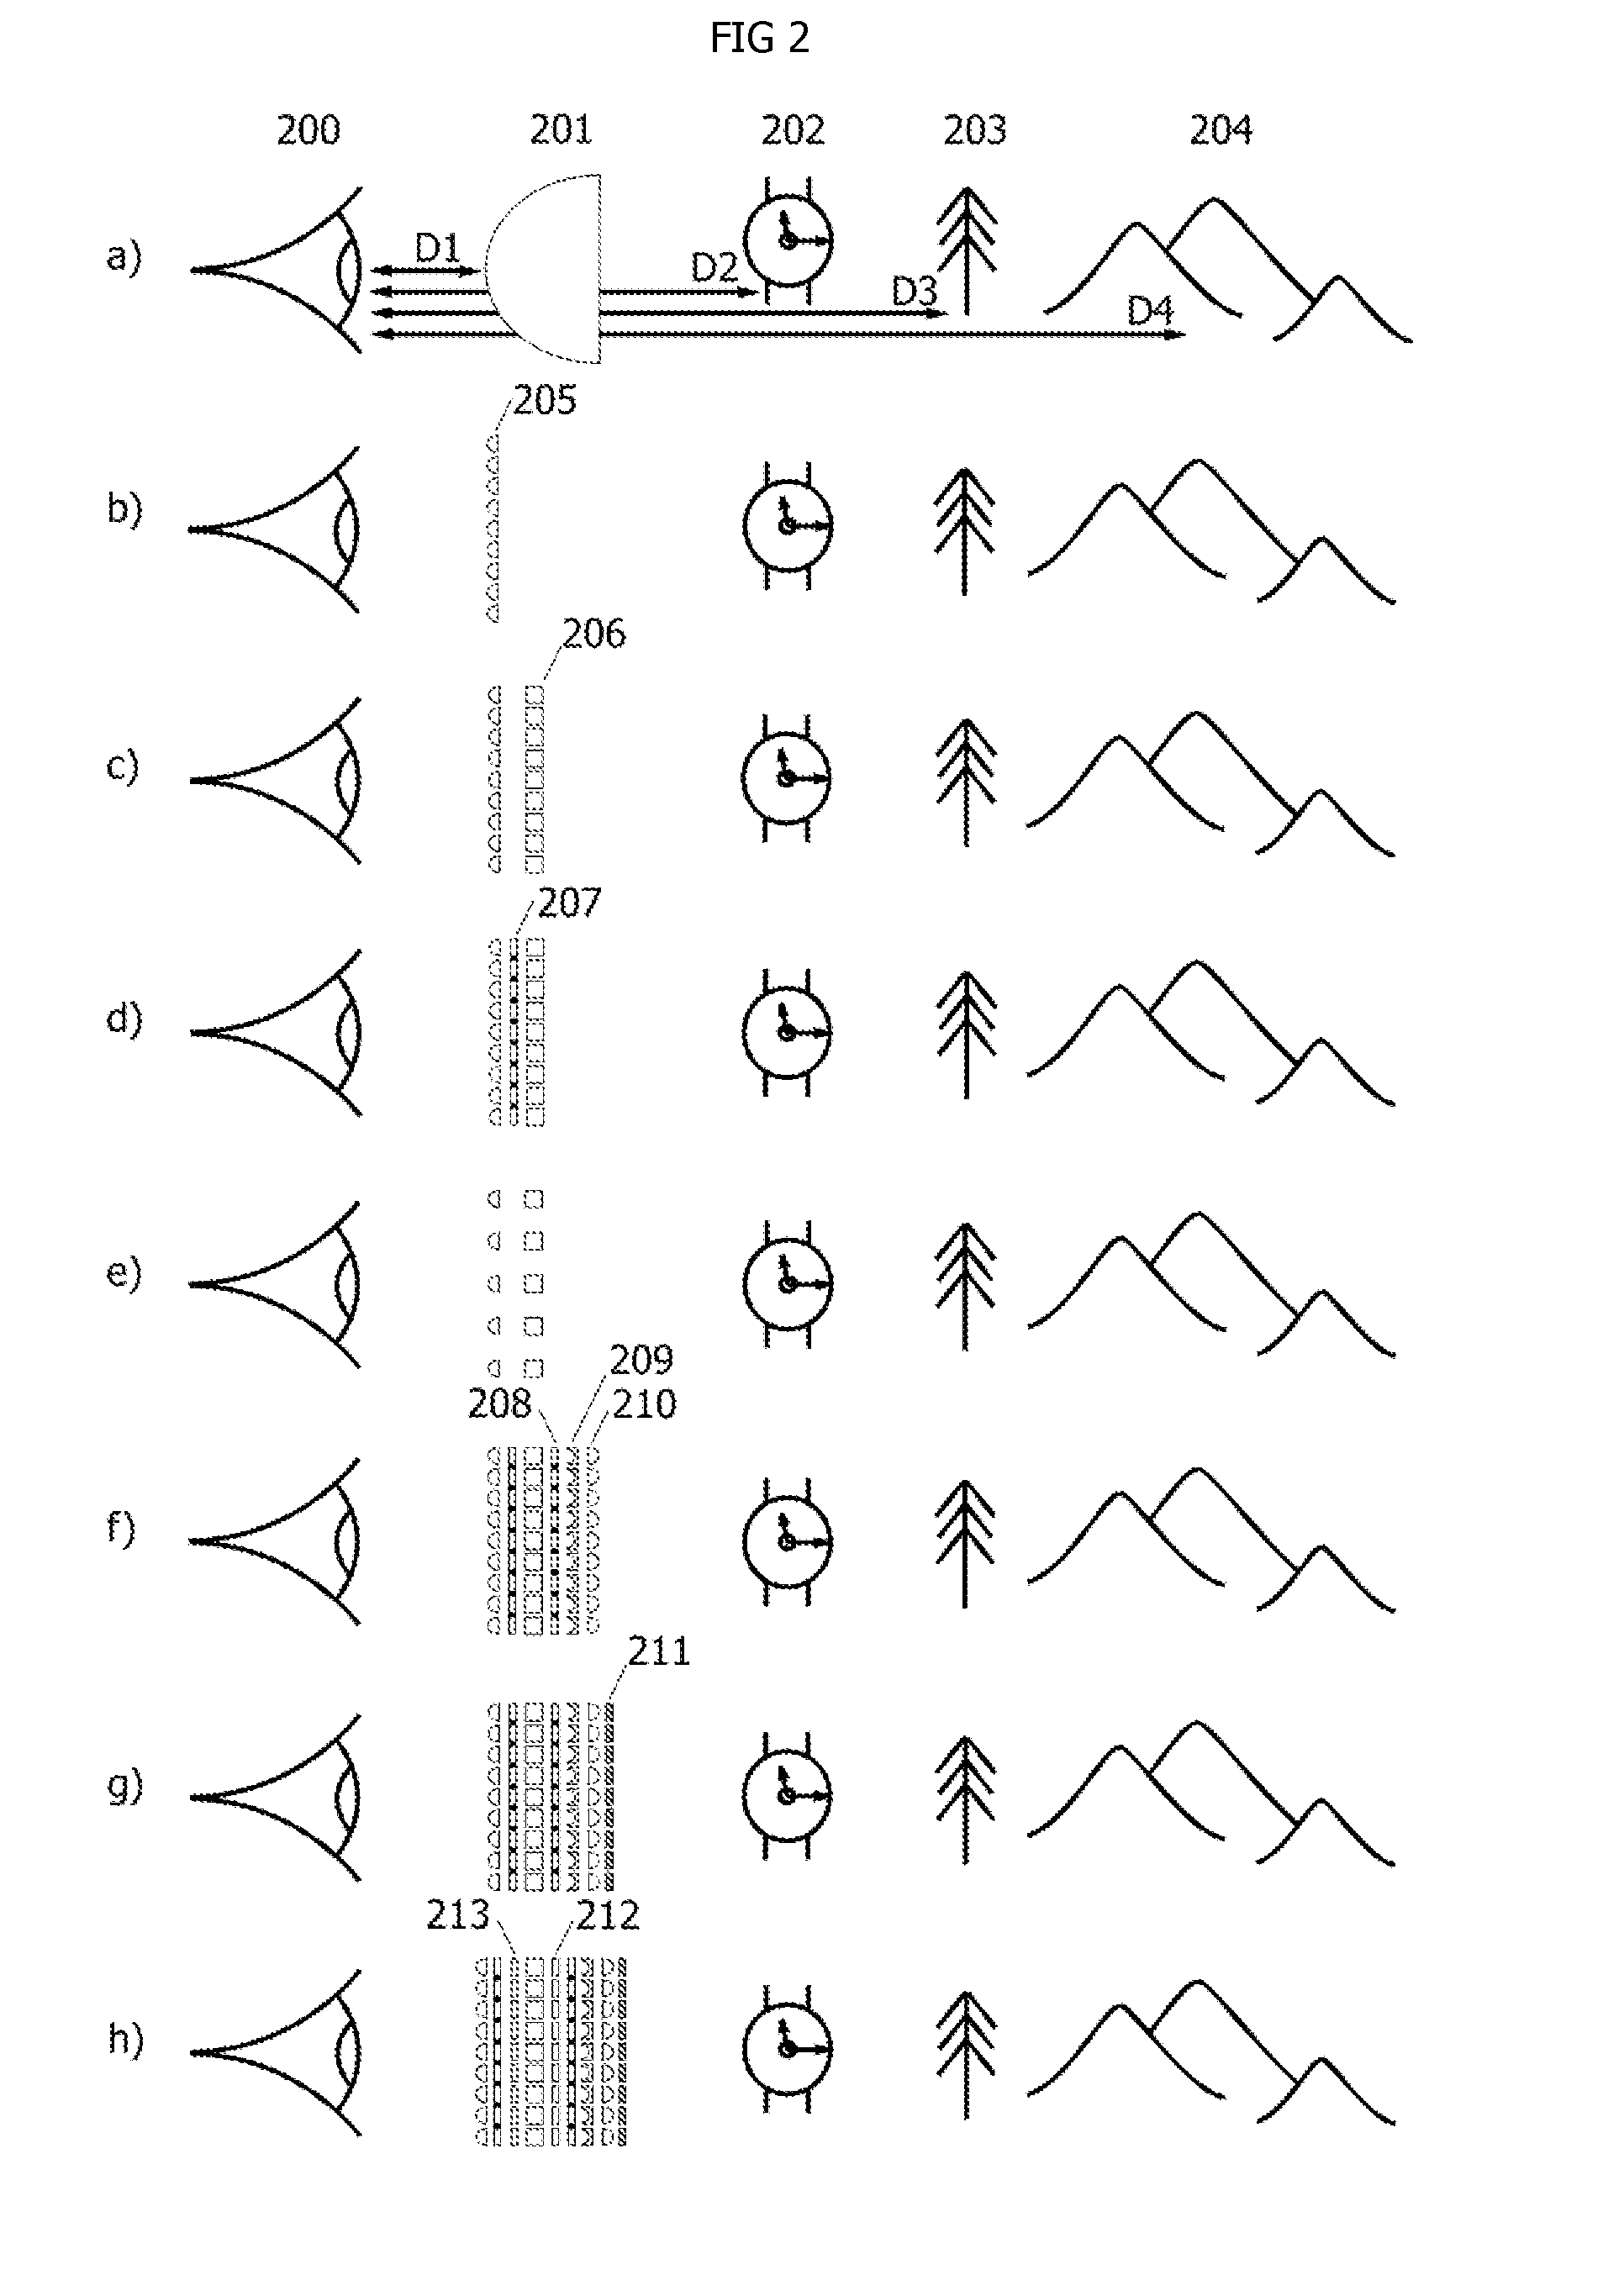 Wearable display devices